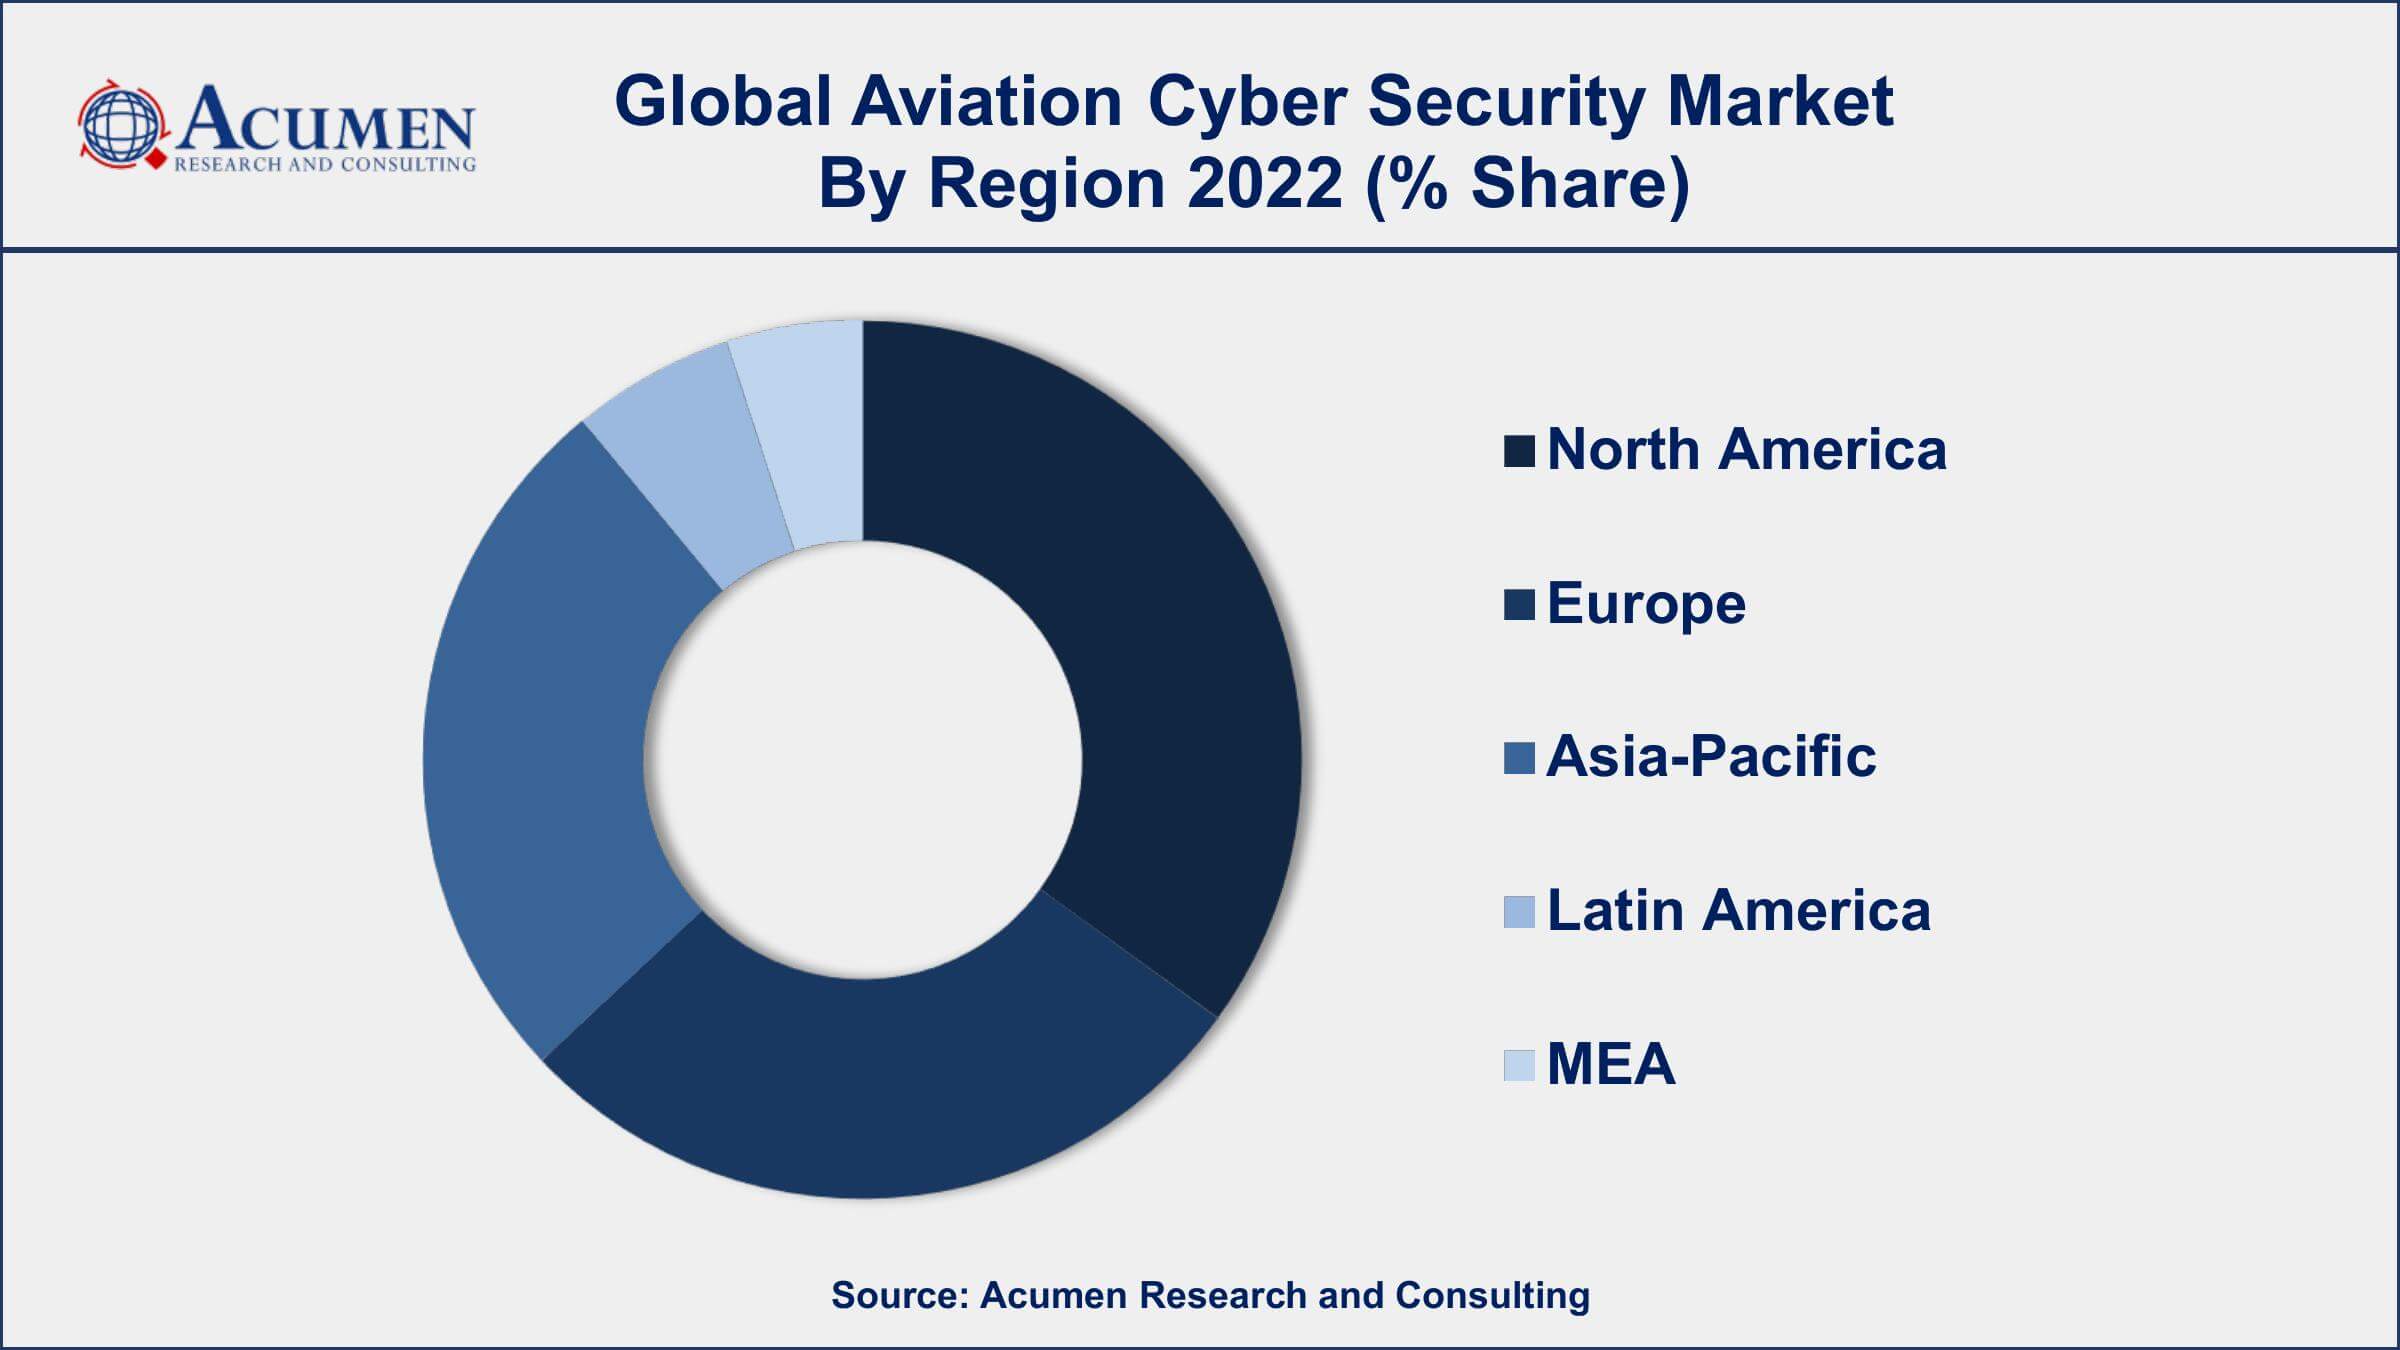 Aviation Cyber Security Market Drivers